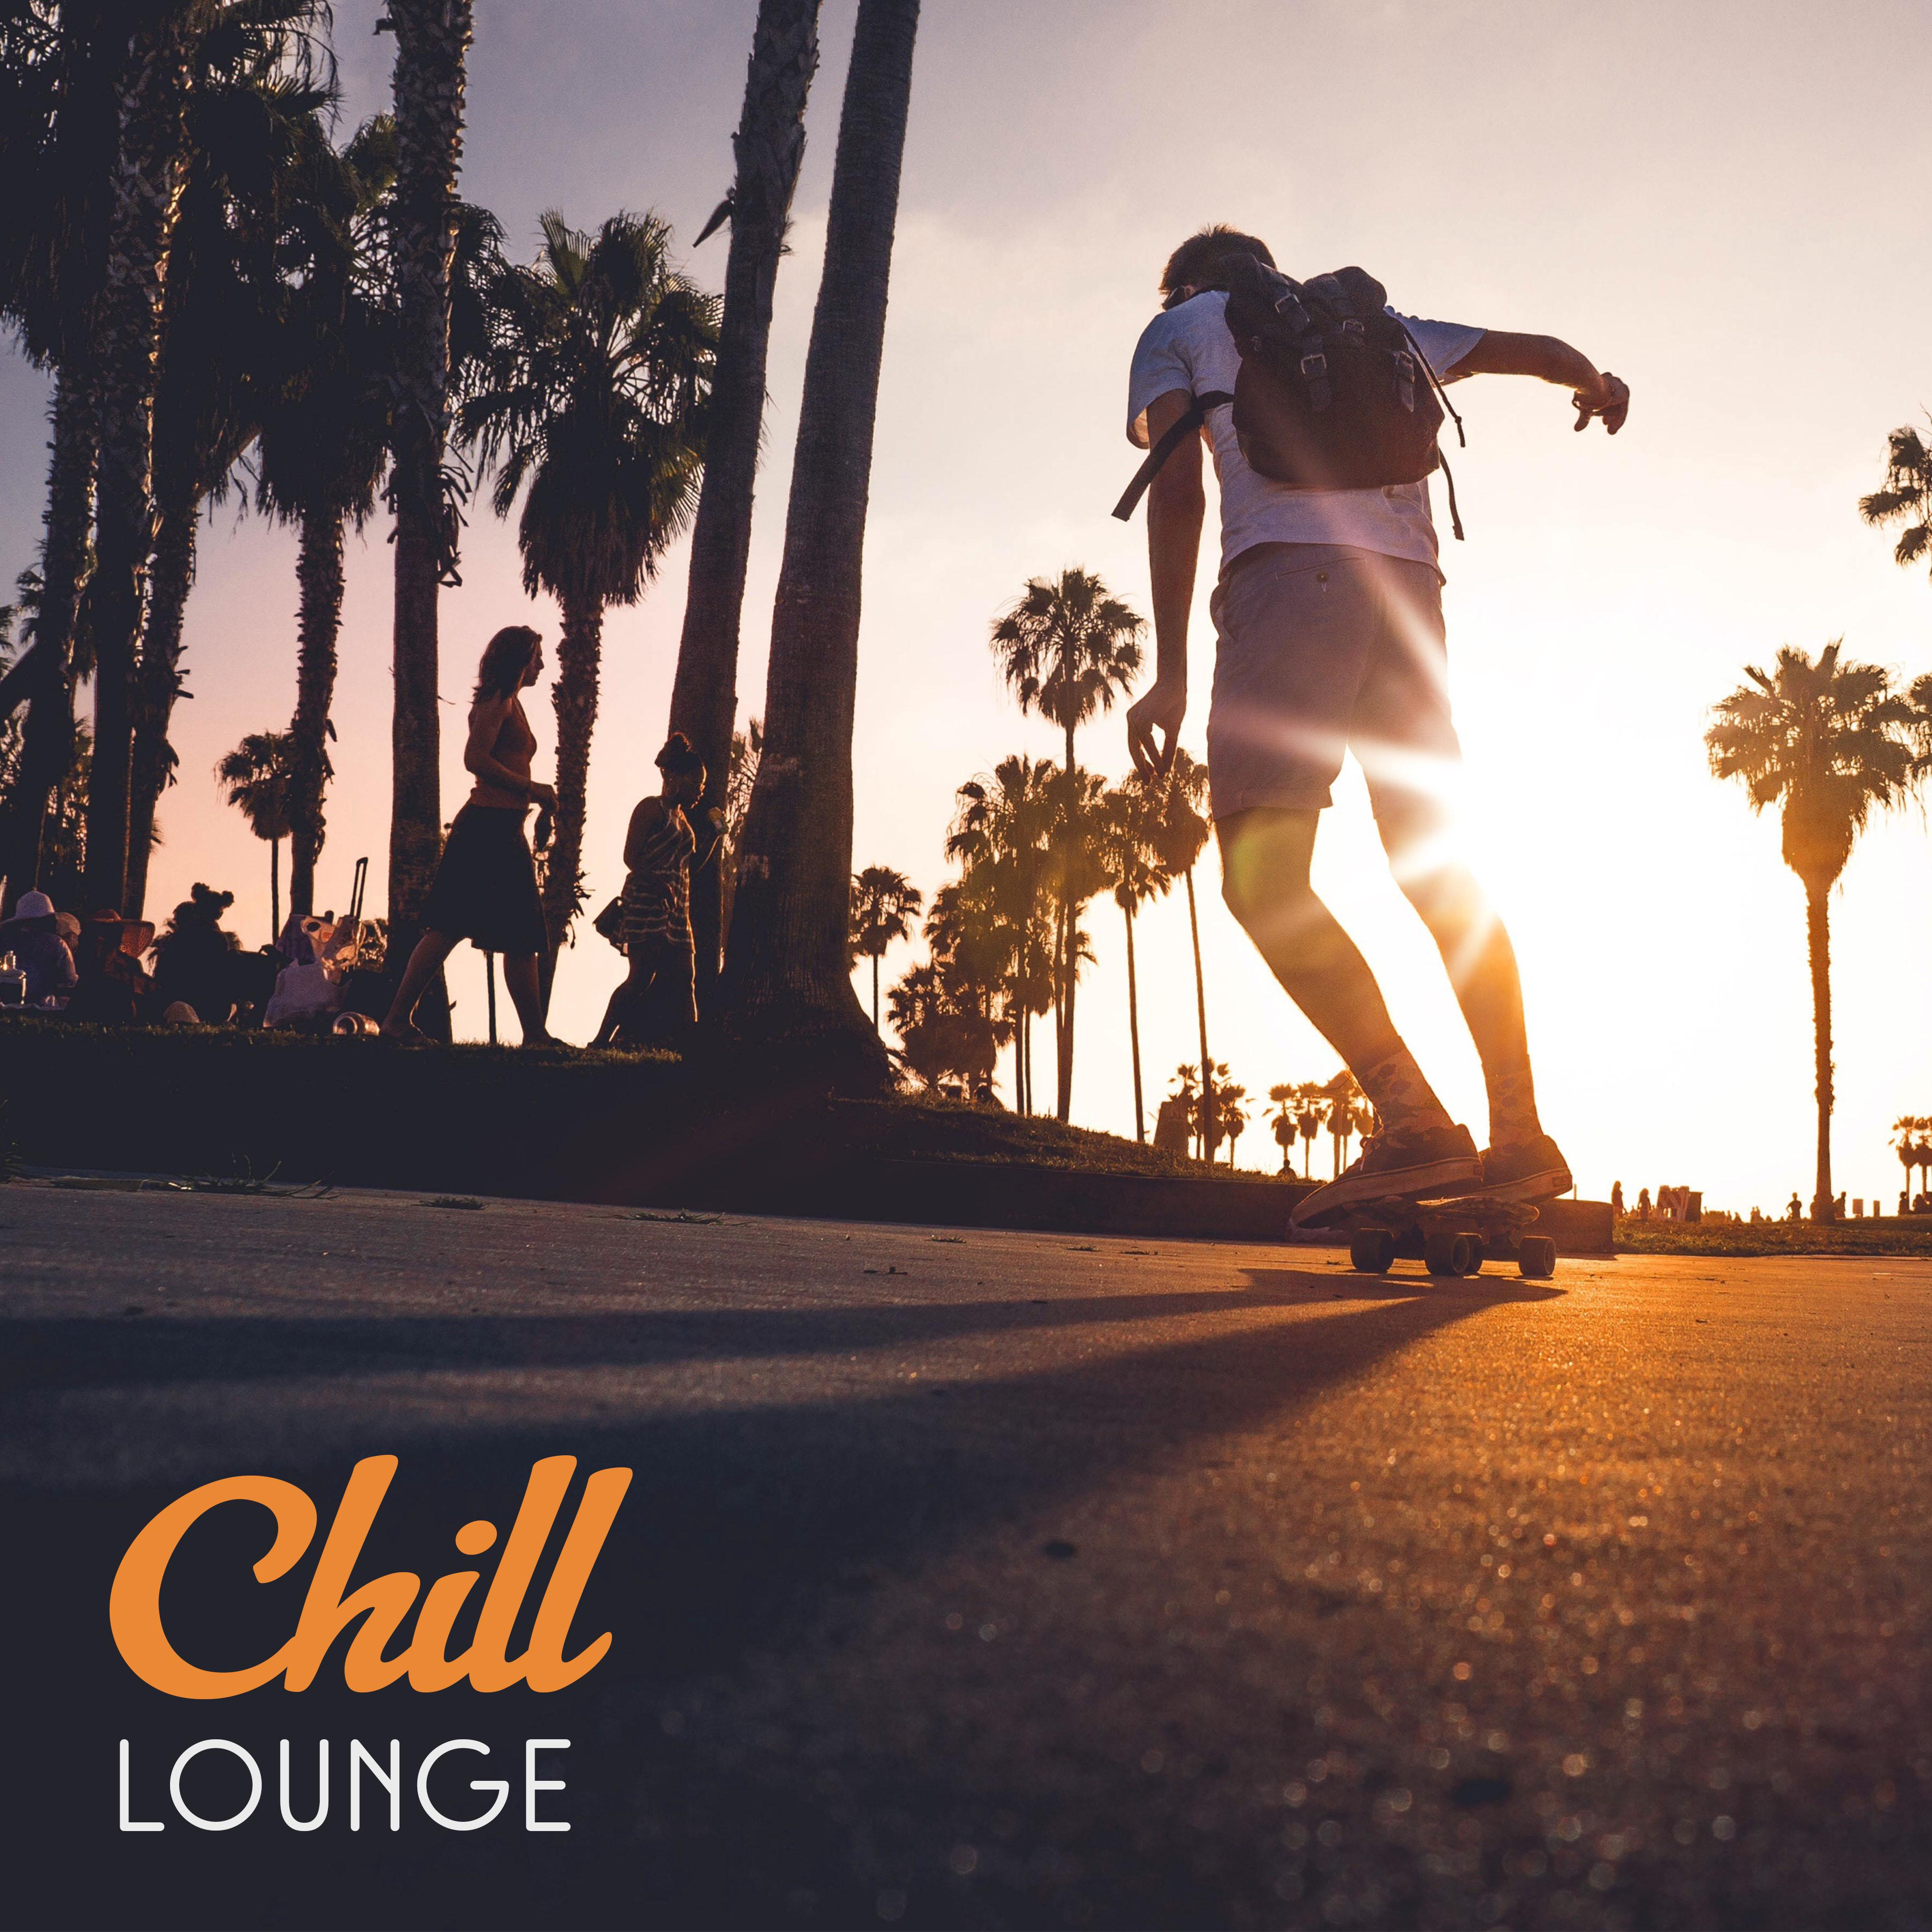 Chill Lounge  Pure Relaxation, Chill Out Mix, Relax on the Beach, Party Night, Ambient Music, Total Rest, Summertime